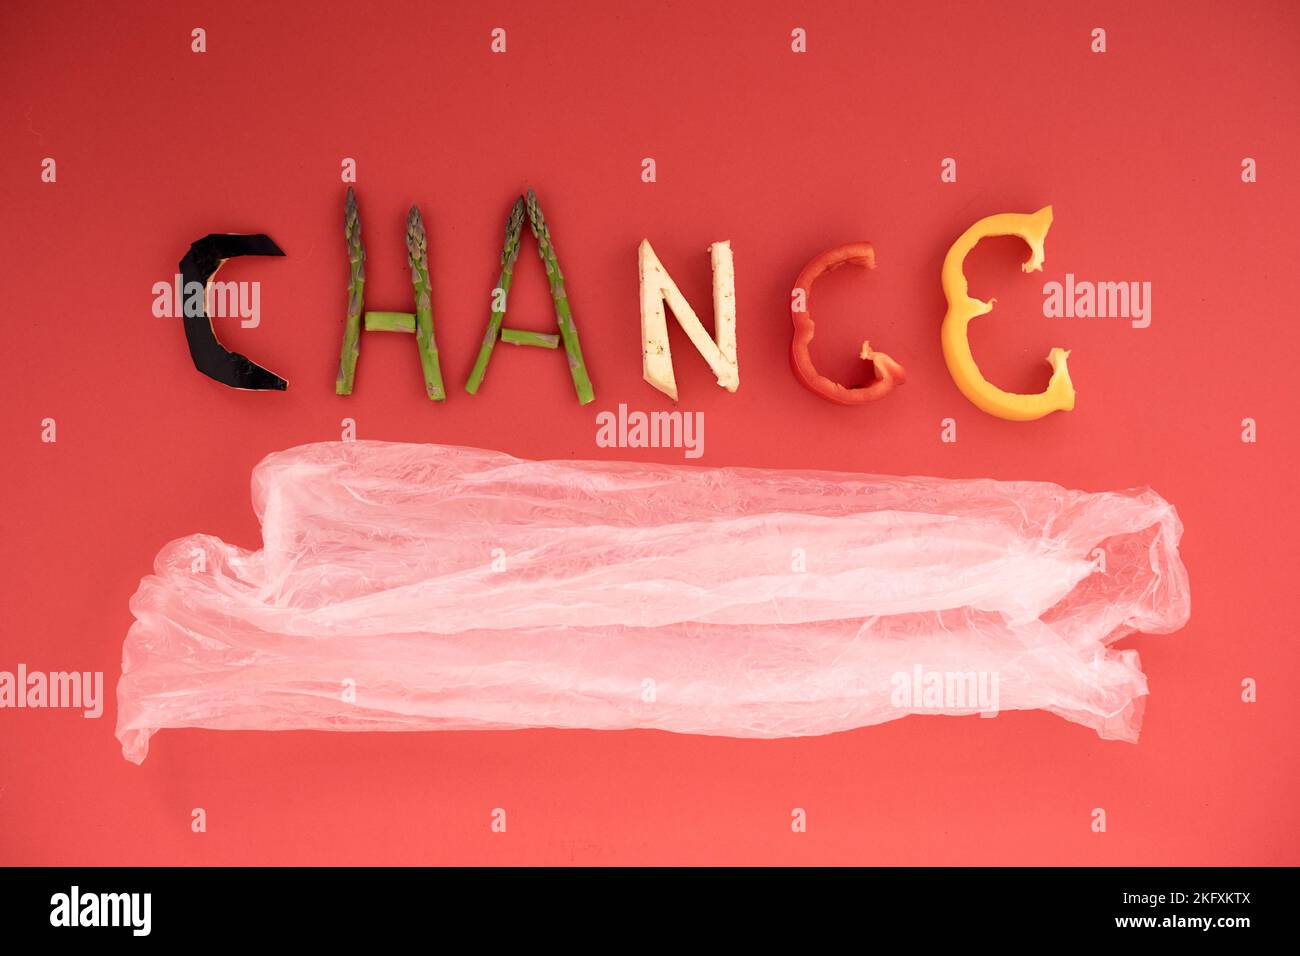 formation of the word change with pieces of vegetables to raise awareness about climate change and the use of plastic on a red background Stock Photo